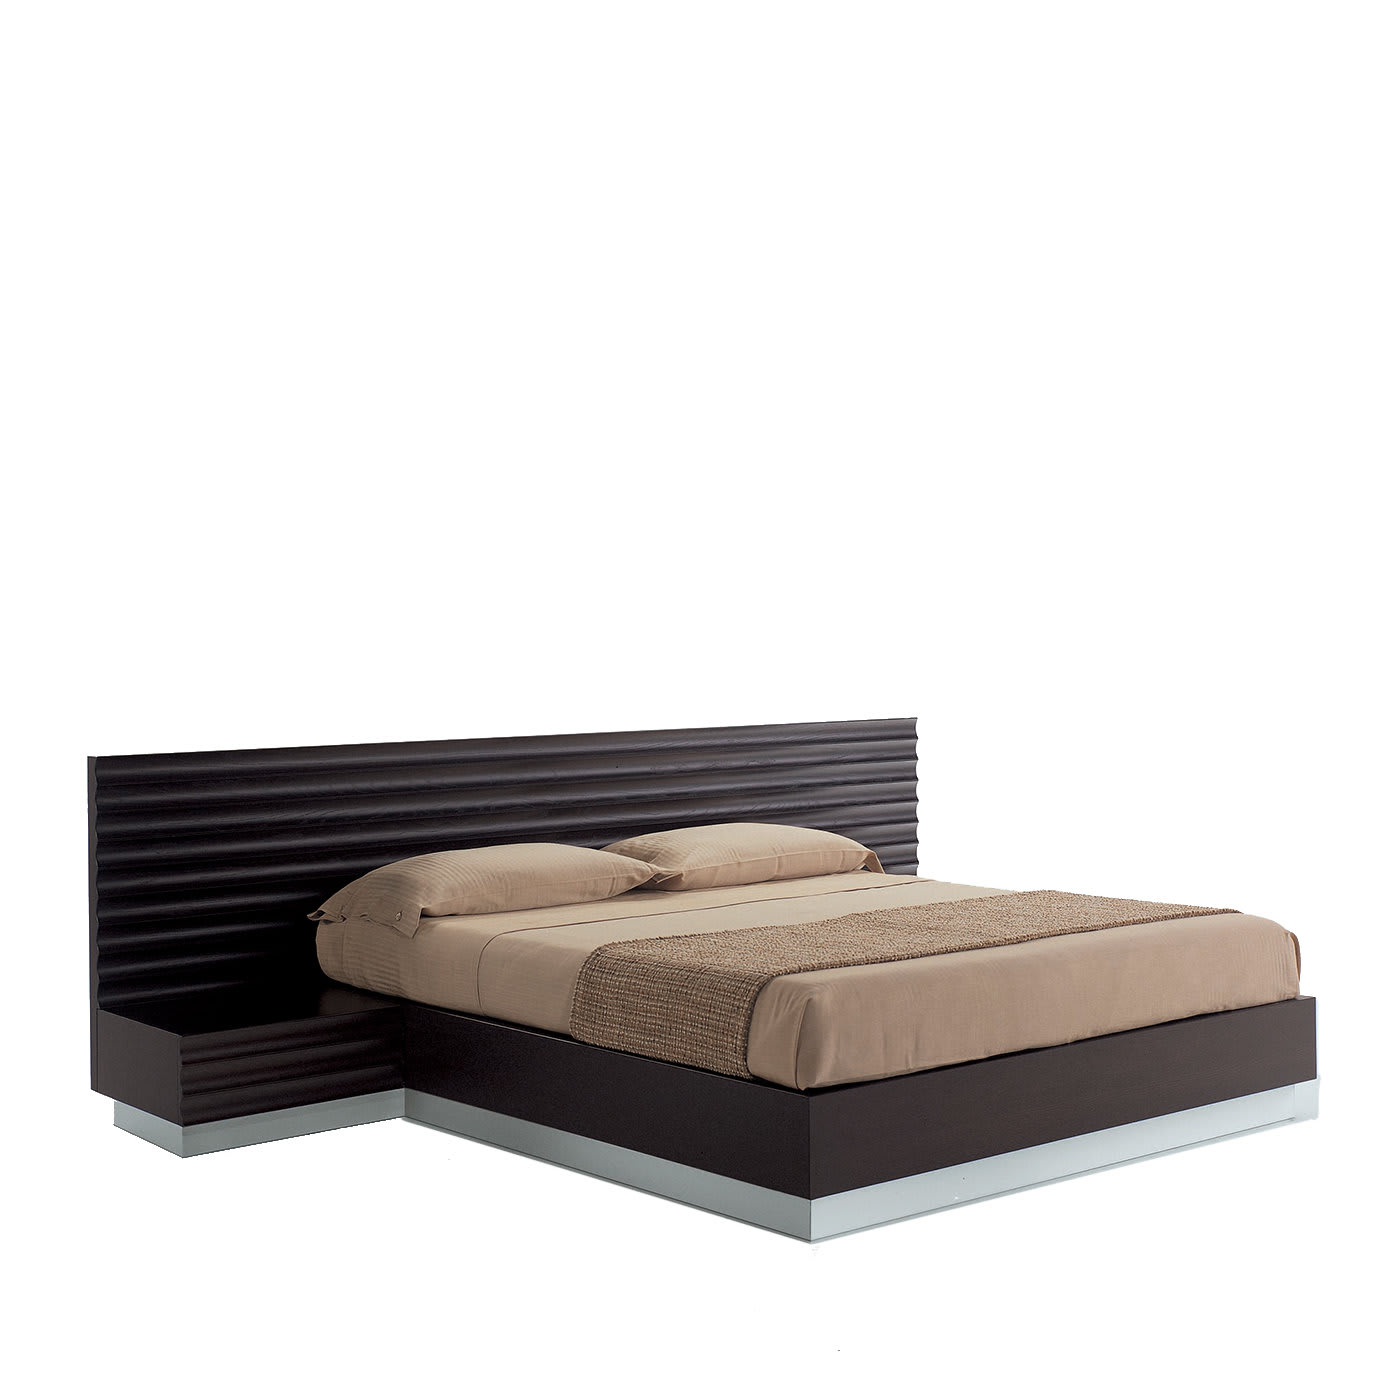 Jaco Bed Frame with Nightstands - Orsi